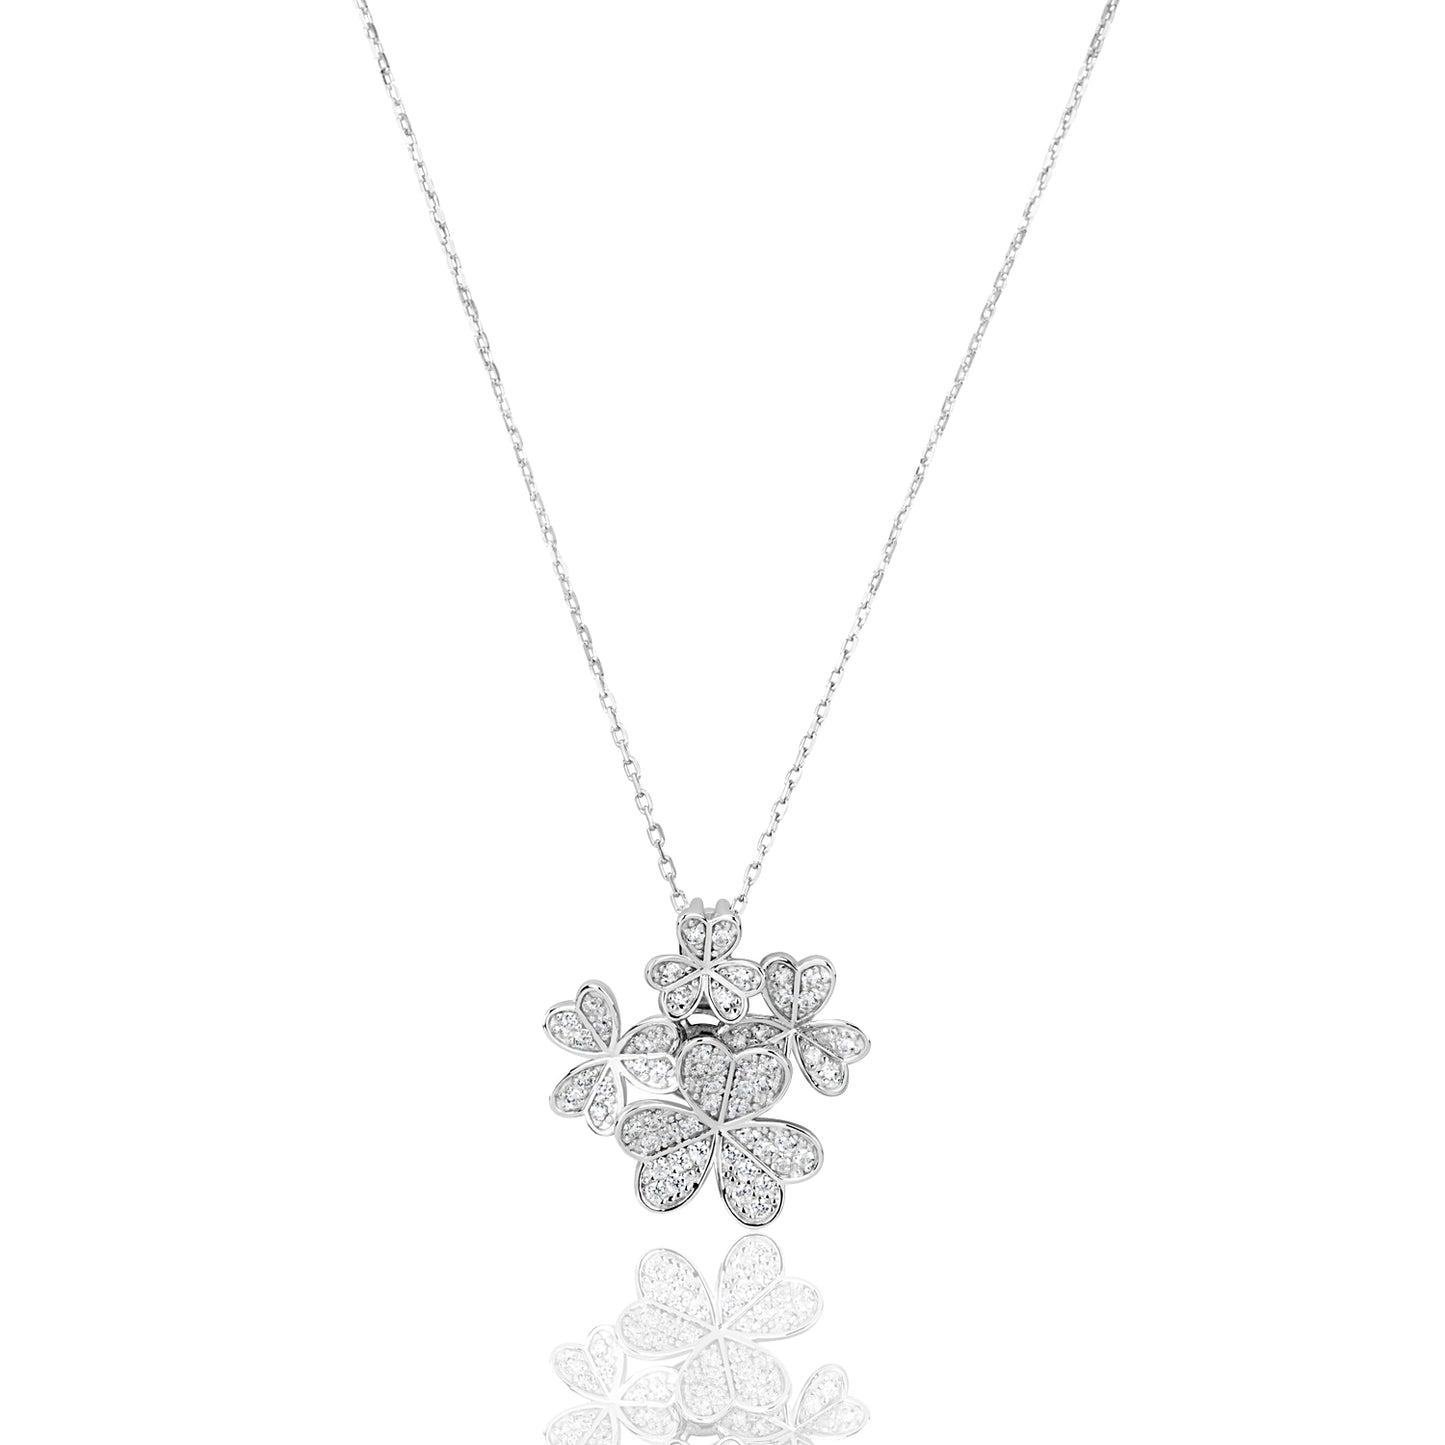 Suzy Levian Sterling Silver White Cubic Zirconia Cluster Flower Pendant Necklace